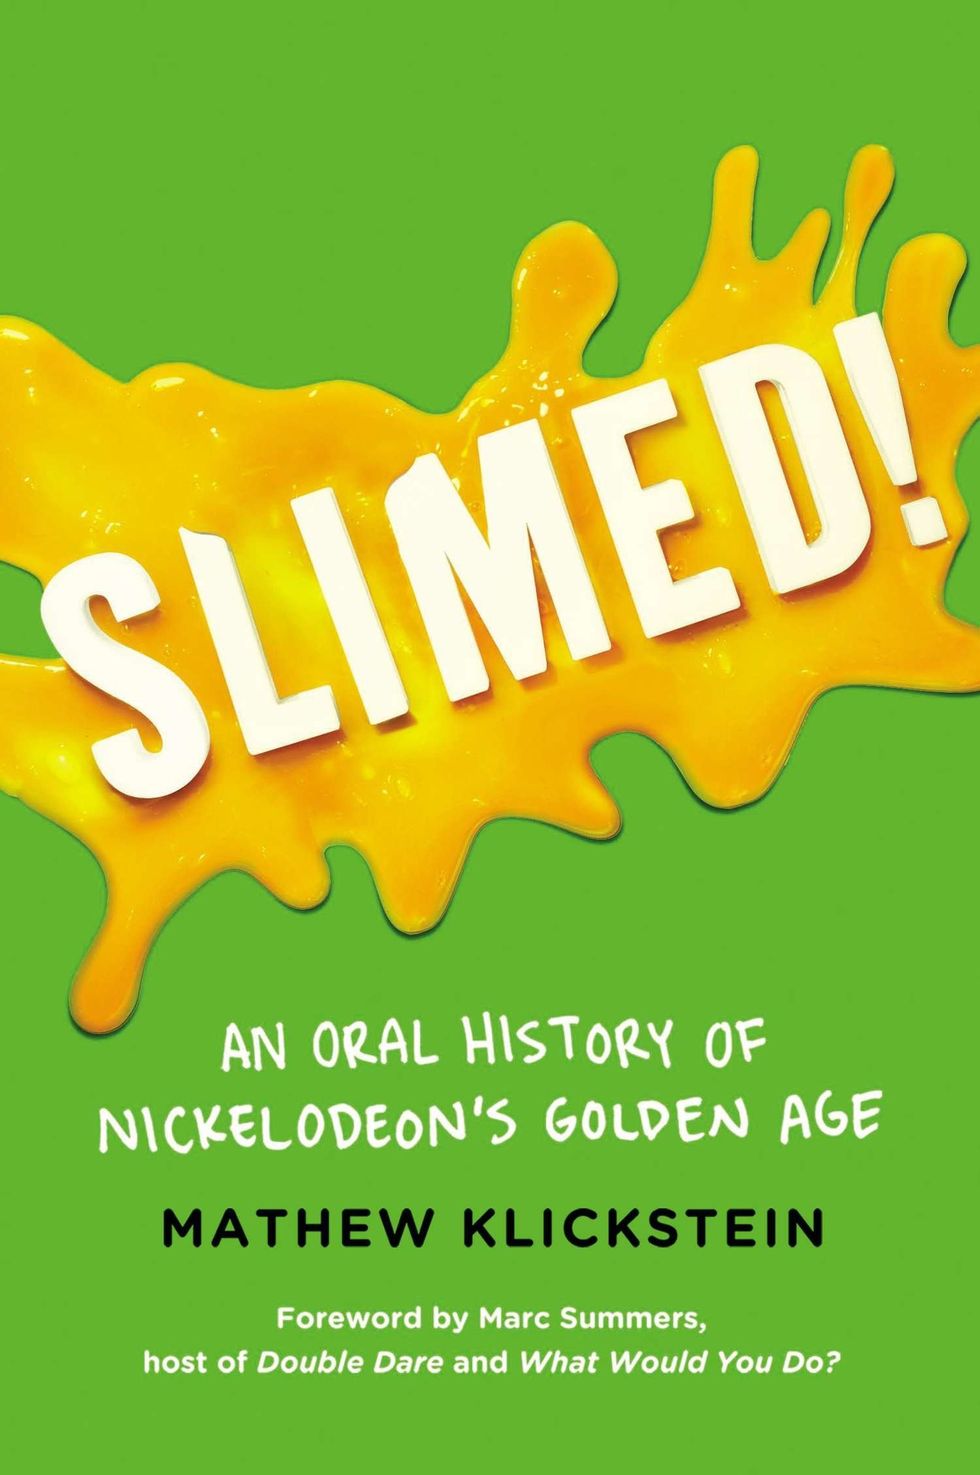 Nickelodeon Slime Facts Book